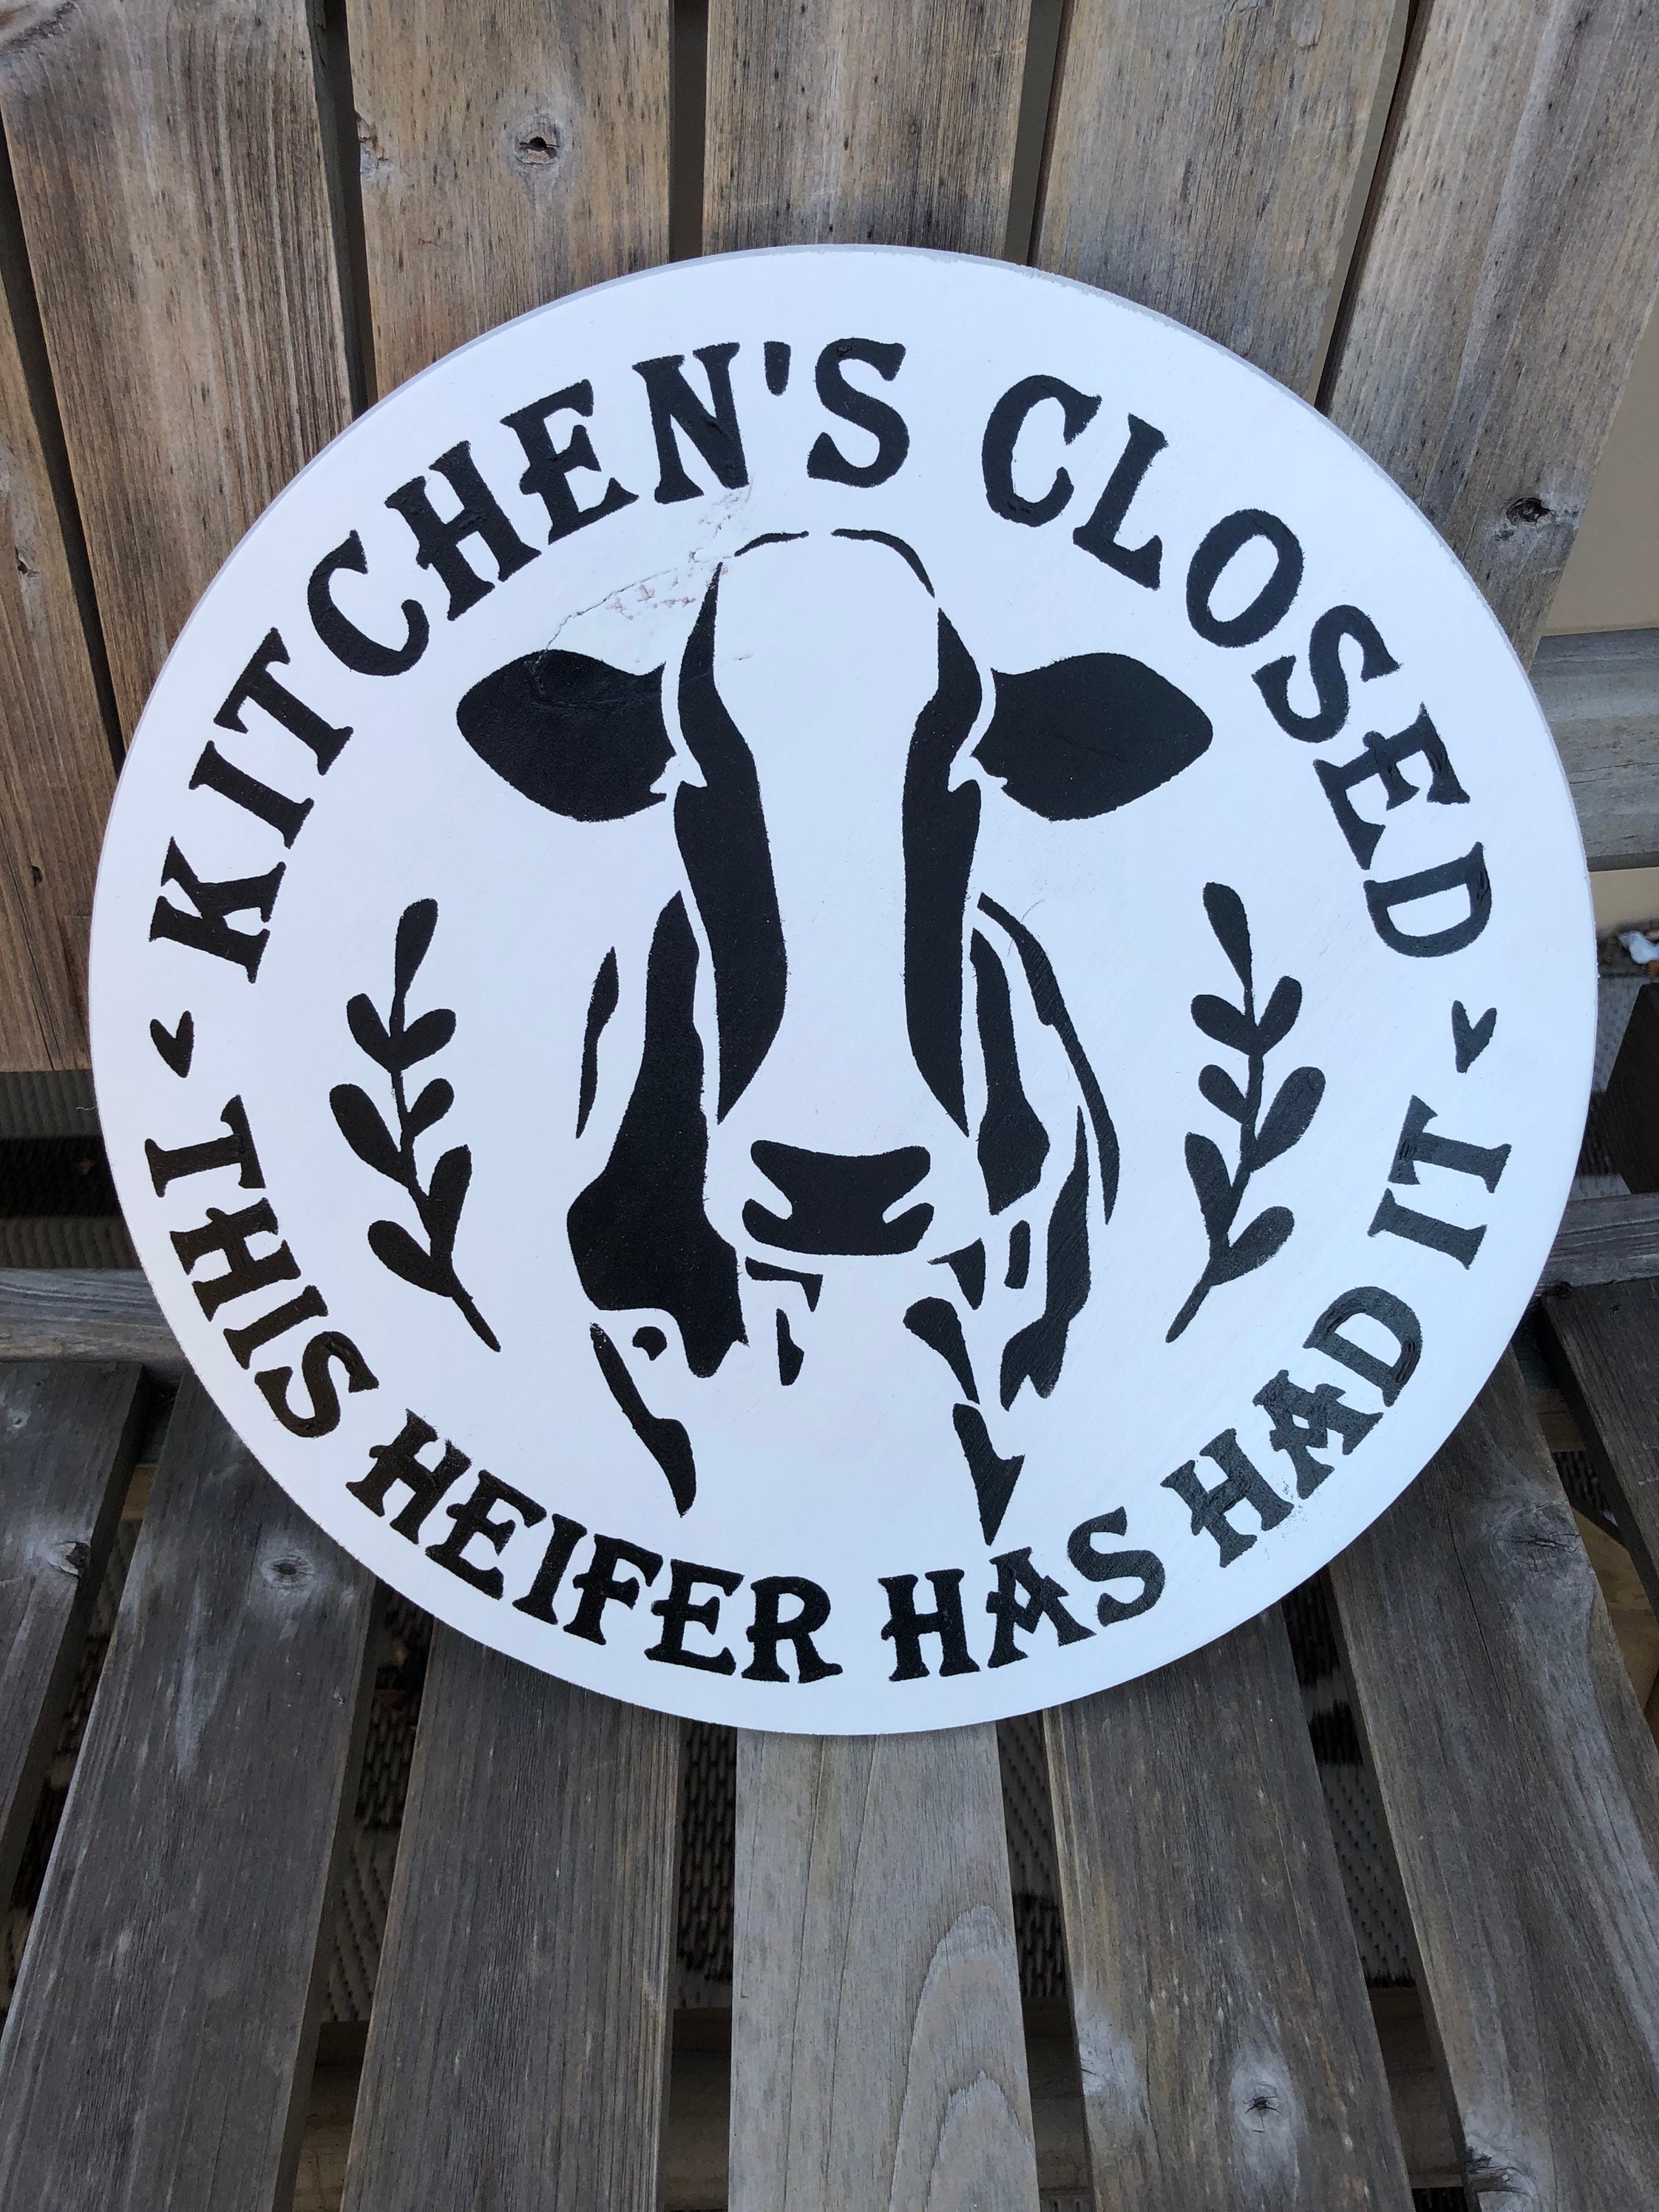 Farmhouse Kitchen Sign Closed Cow This Heifer's Had It Rustic Wood Wall Hanging